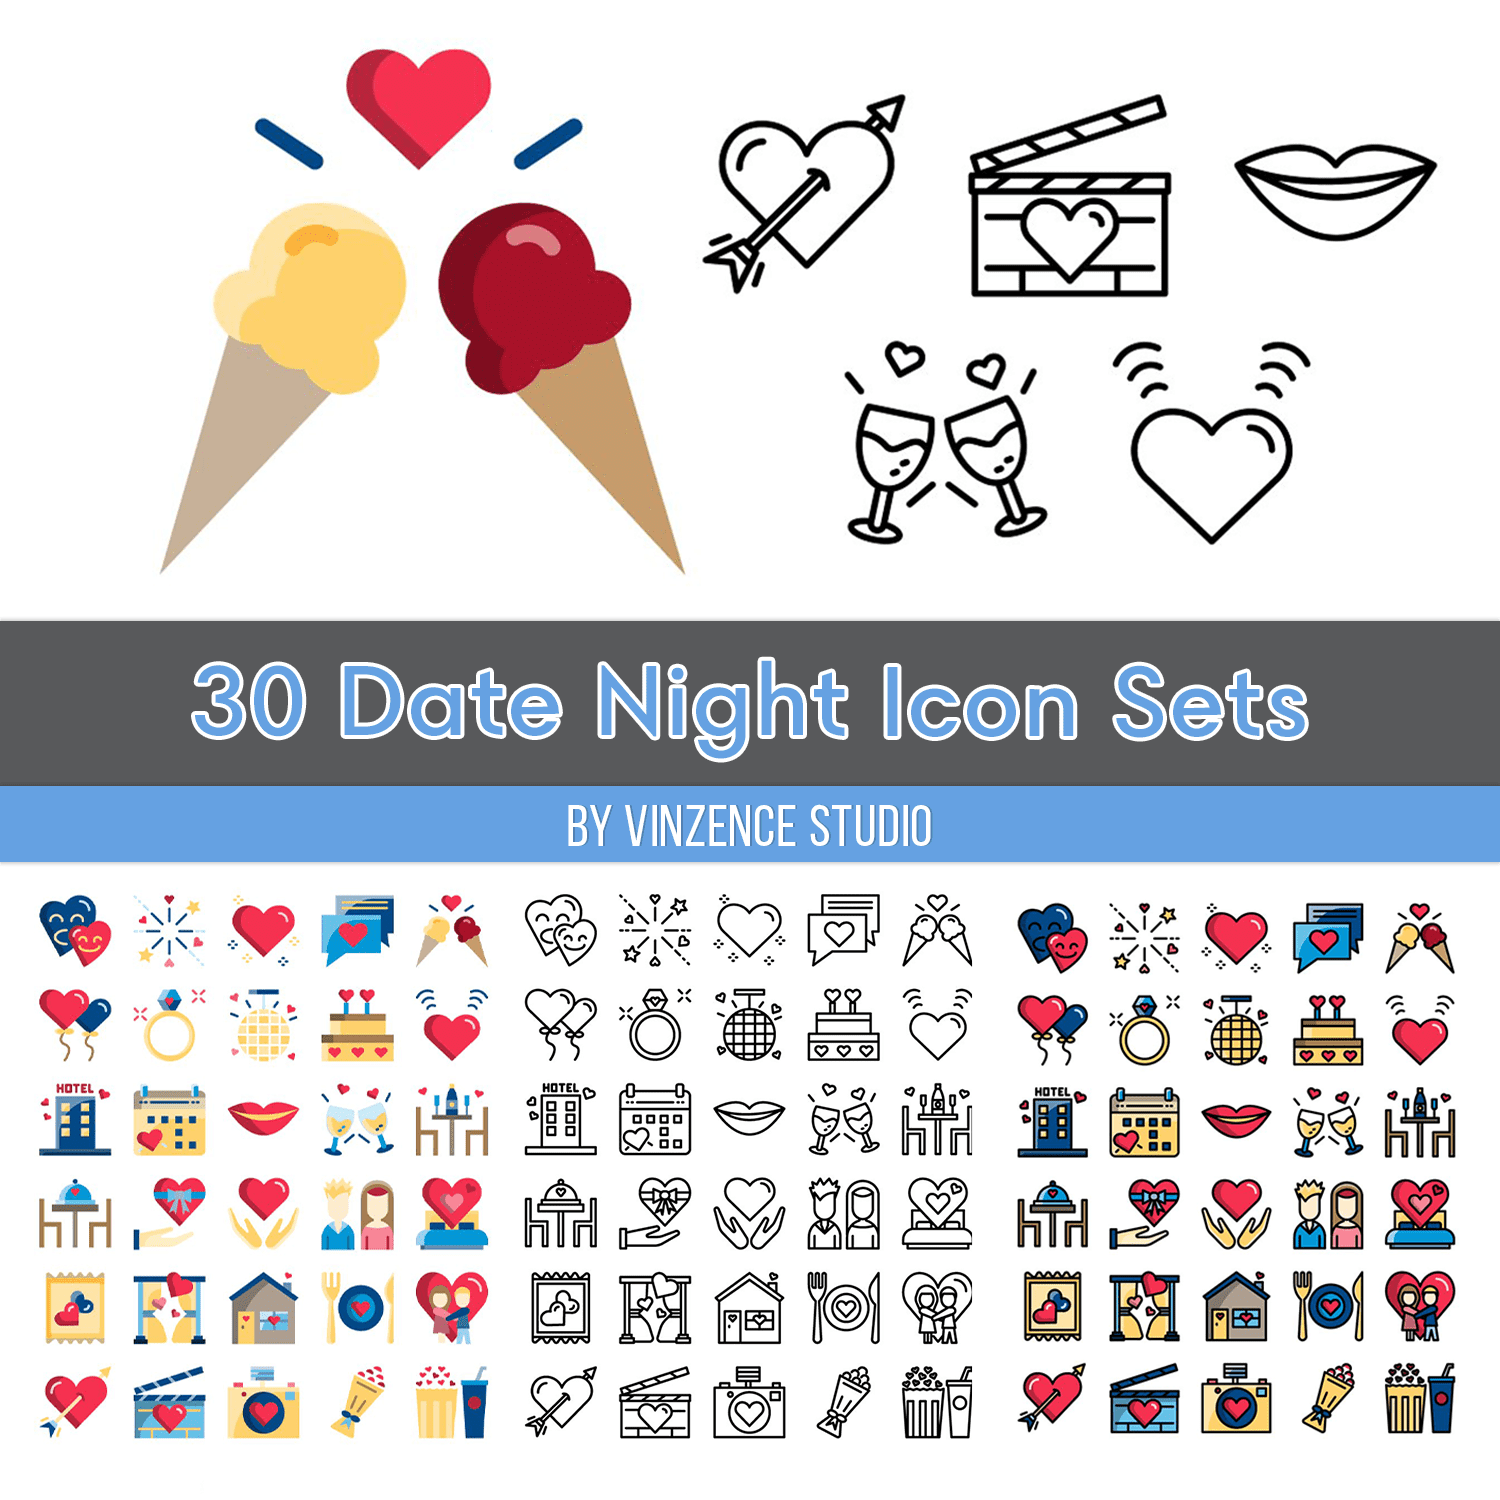 30 Date Night Icon Sets Cover.